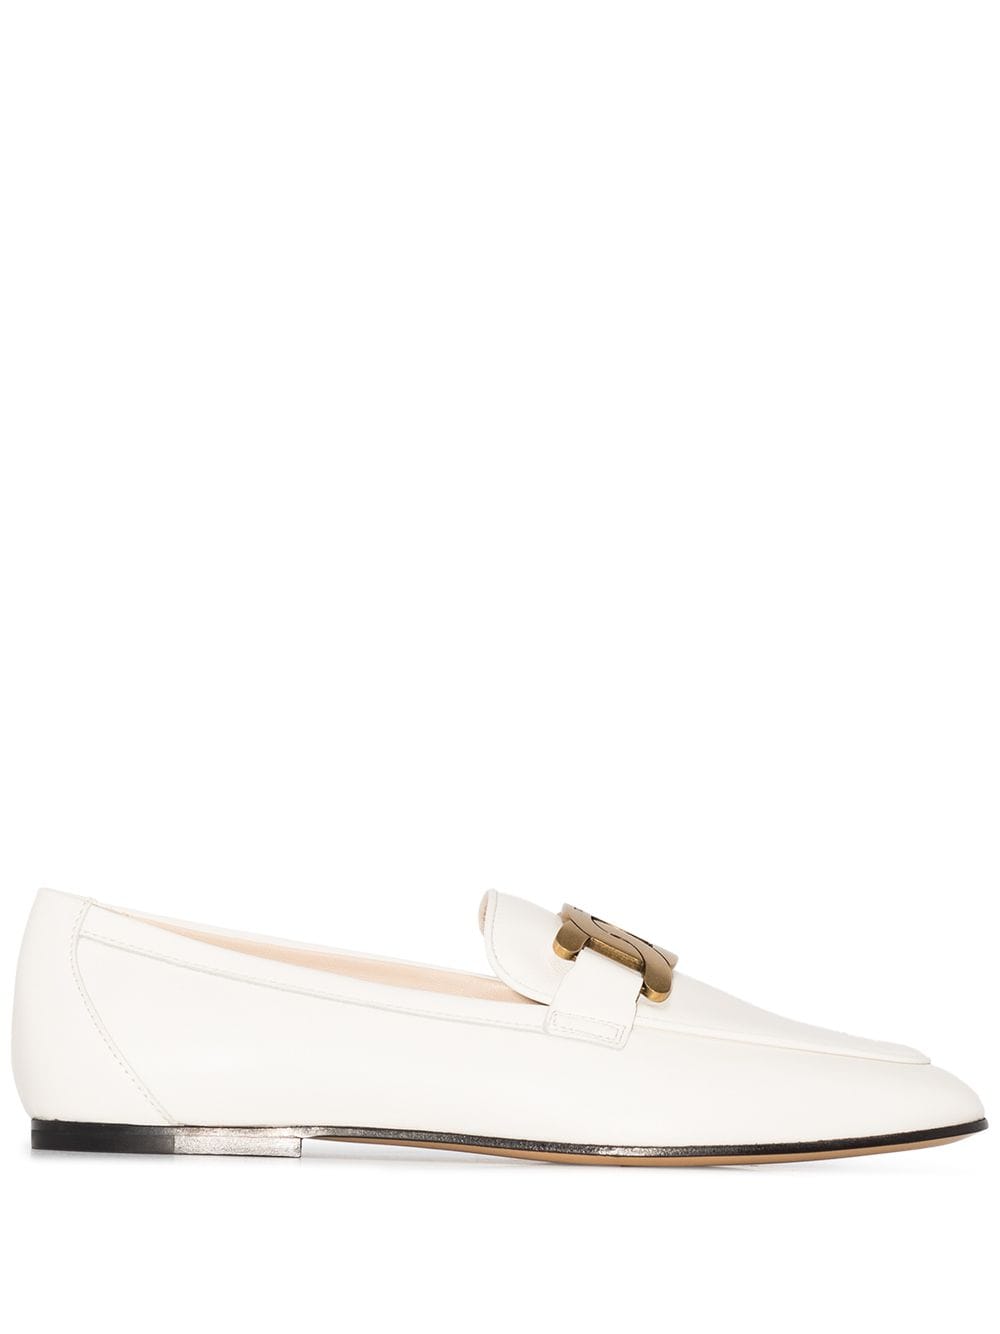 Tod's Kate gold-chain leather loafers - White von Tod's